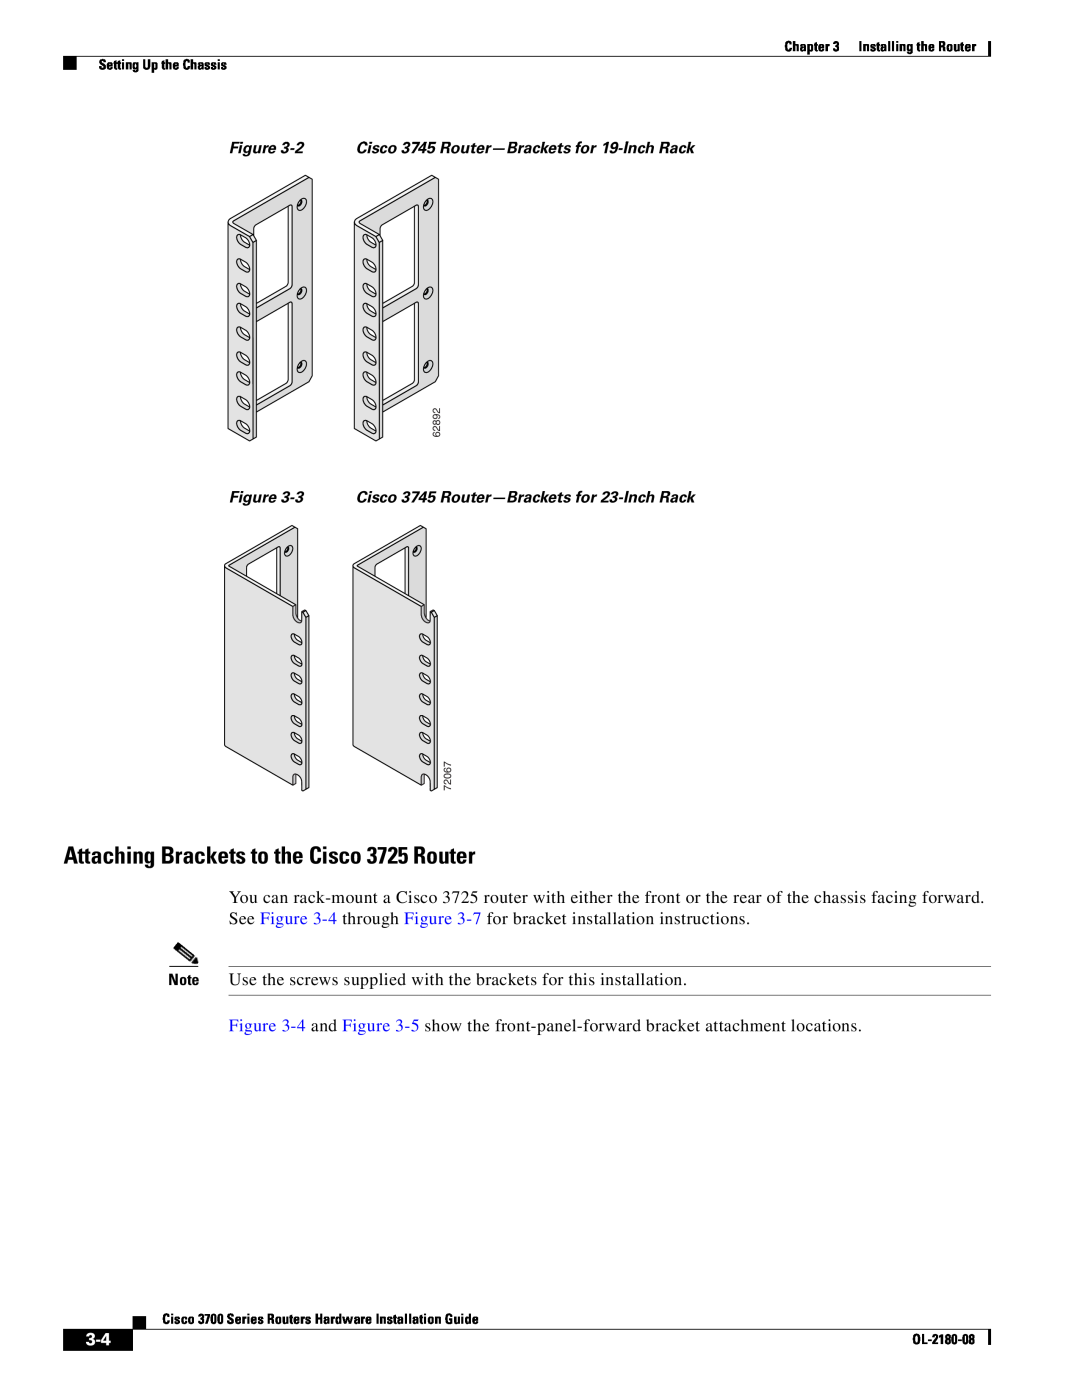 Cisco Systems 3700 Series manual Attaching Brackets to the Cisco 3725 Router 